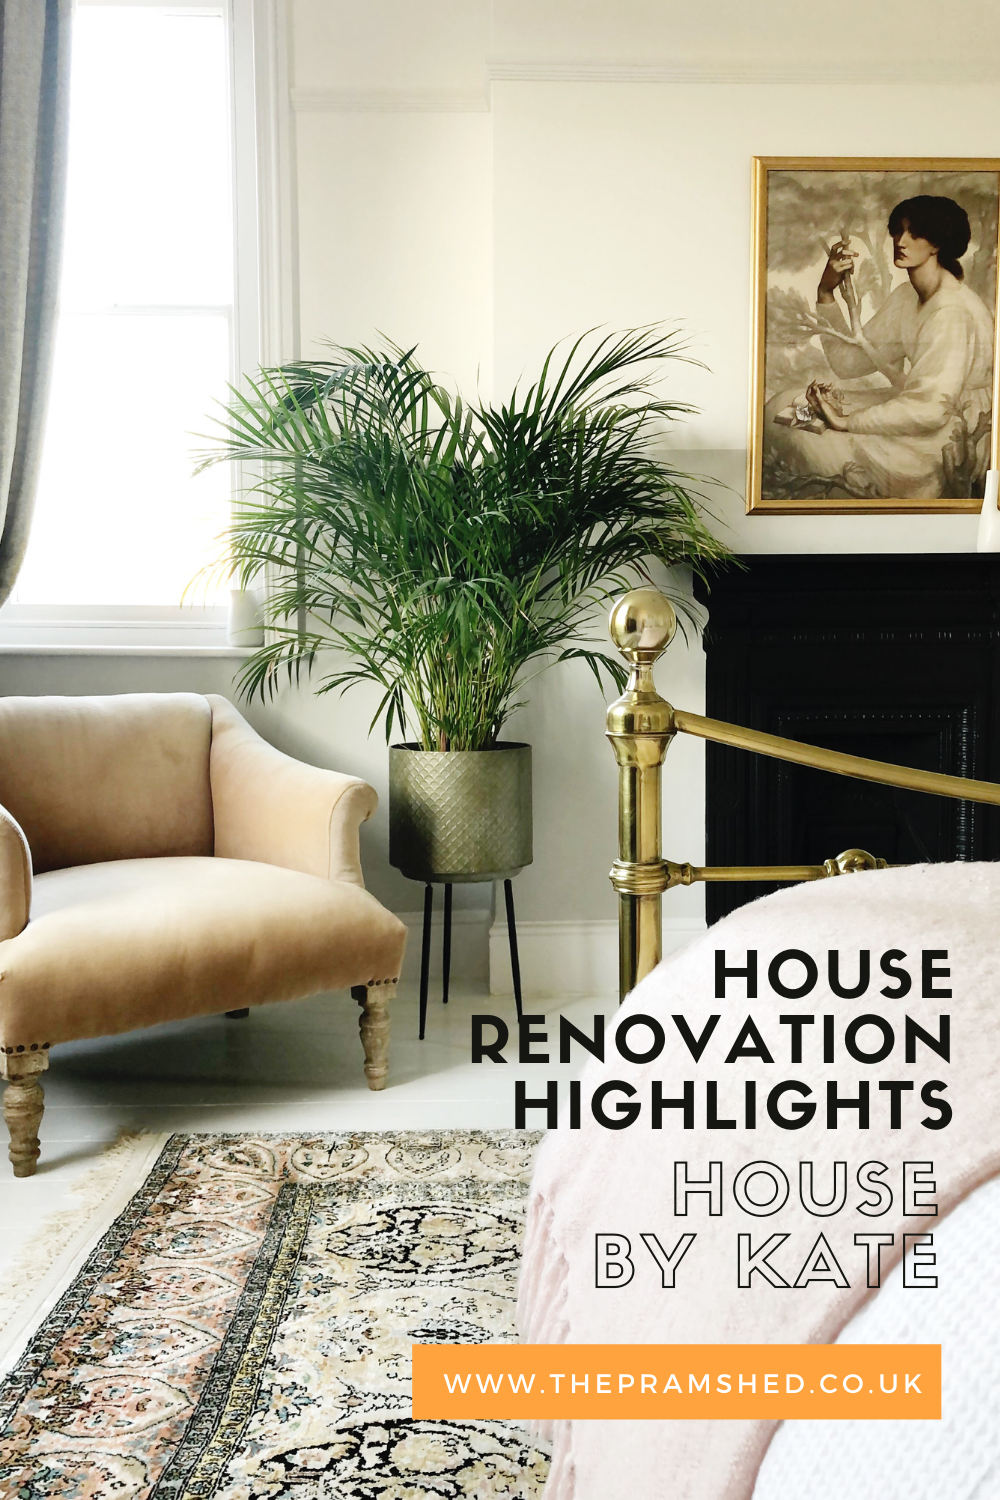 House Renovation Highlights featuring House by Kate